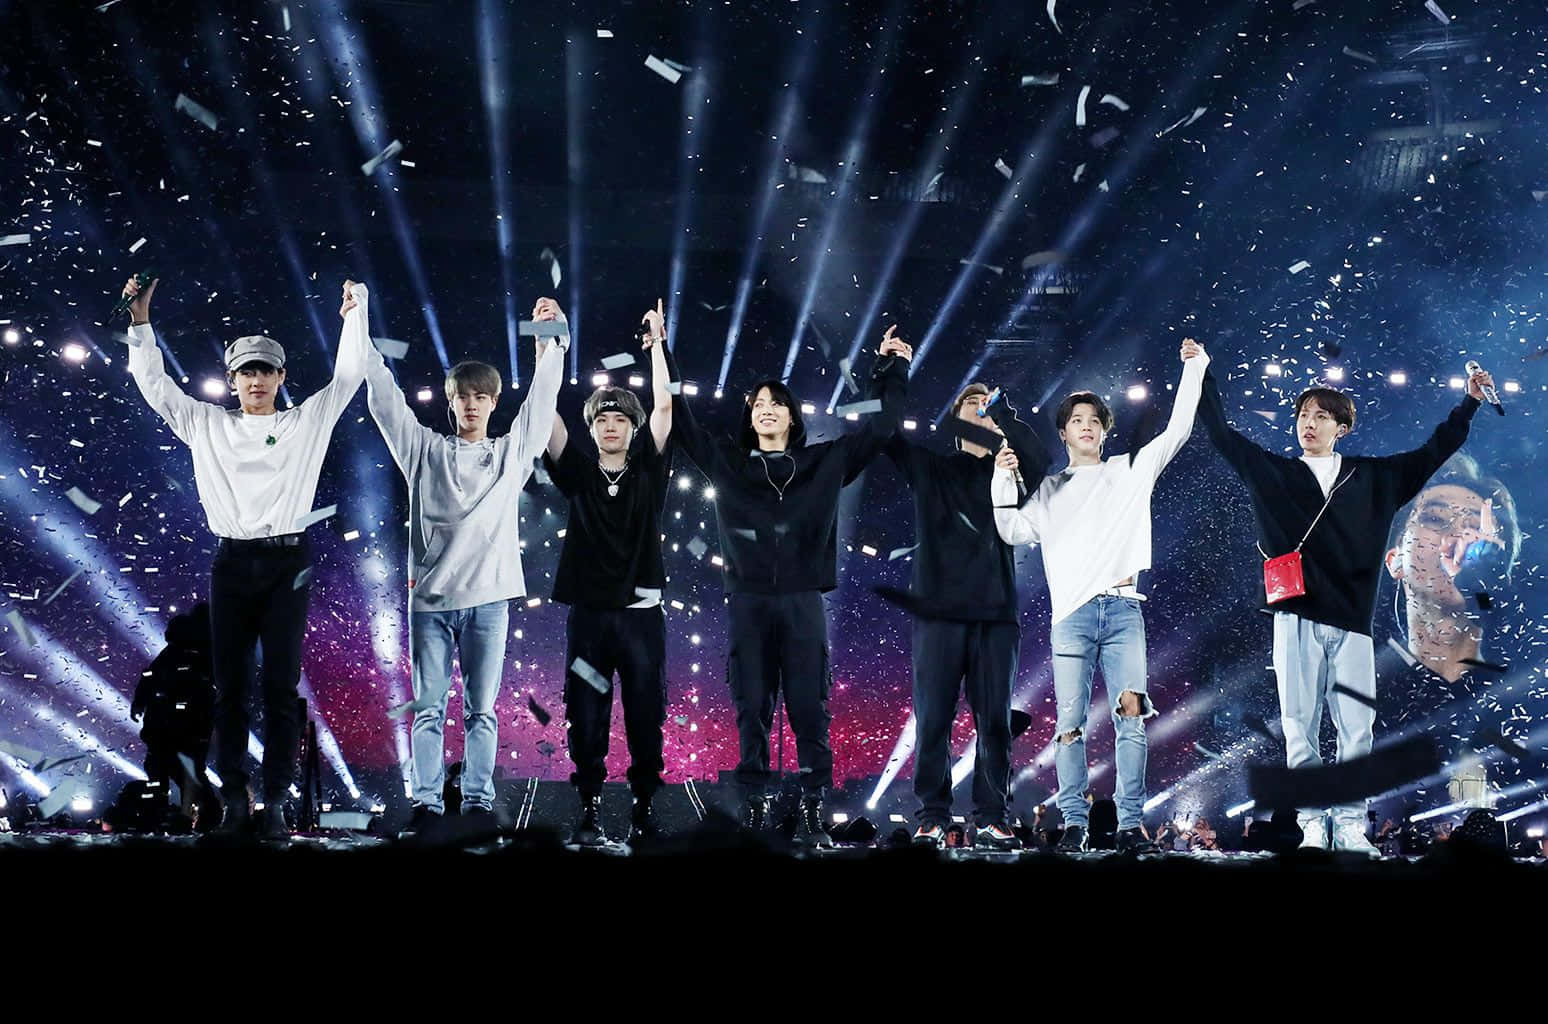 Captivating BTS Performance on Stage Wallpaper